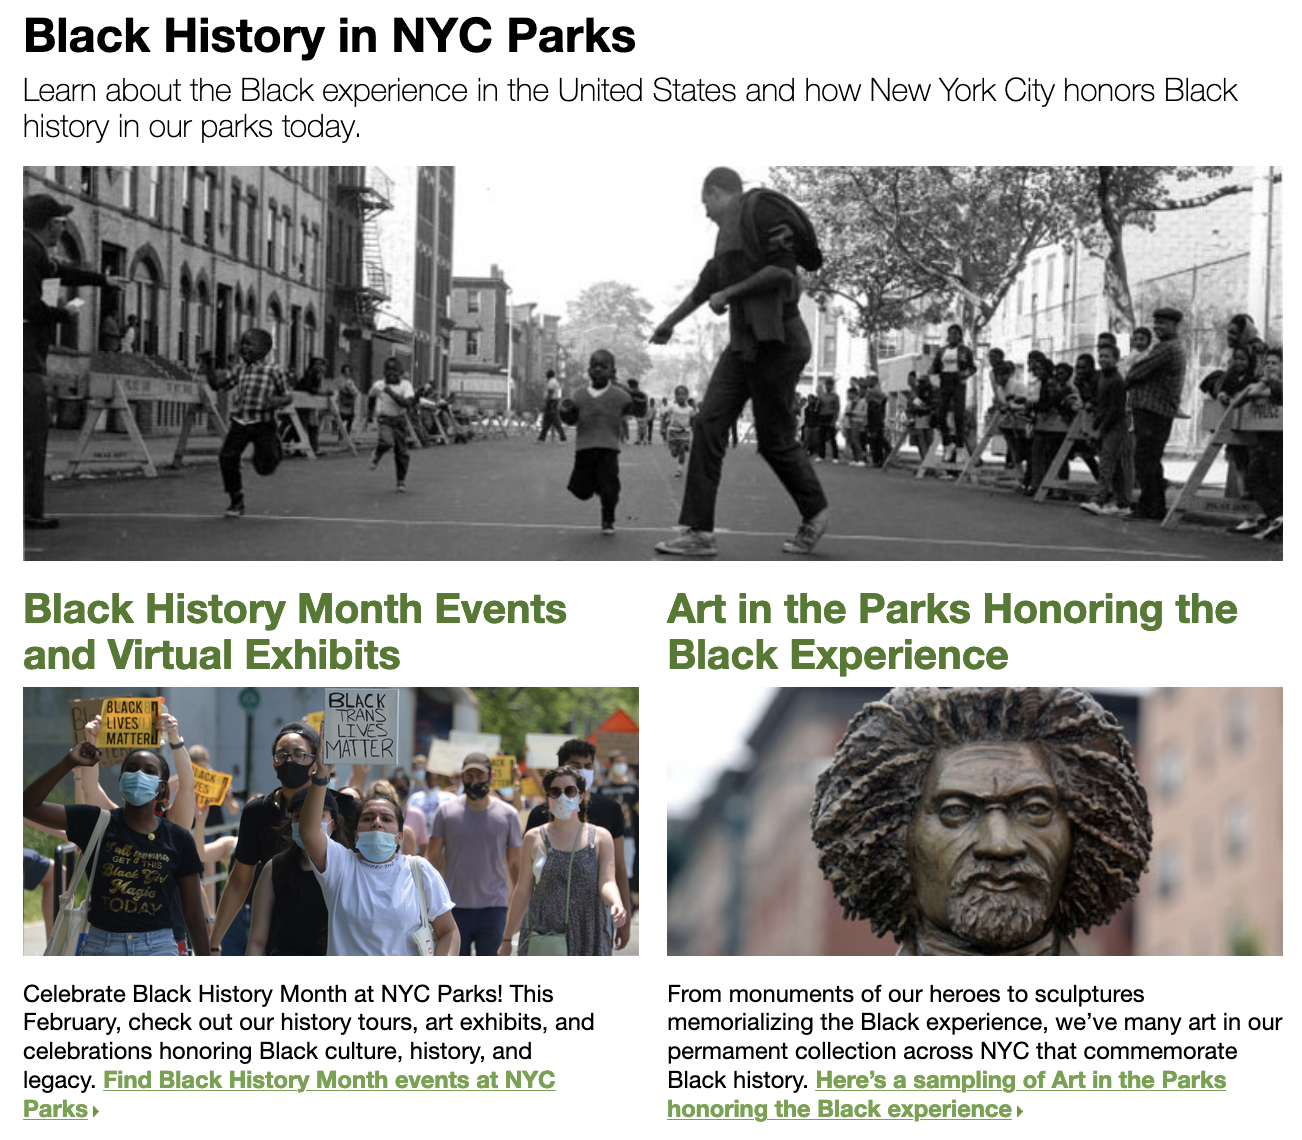 Art in the Parks Honoring the Black Experience : NYC Parks